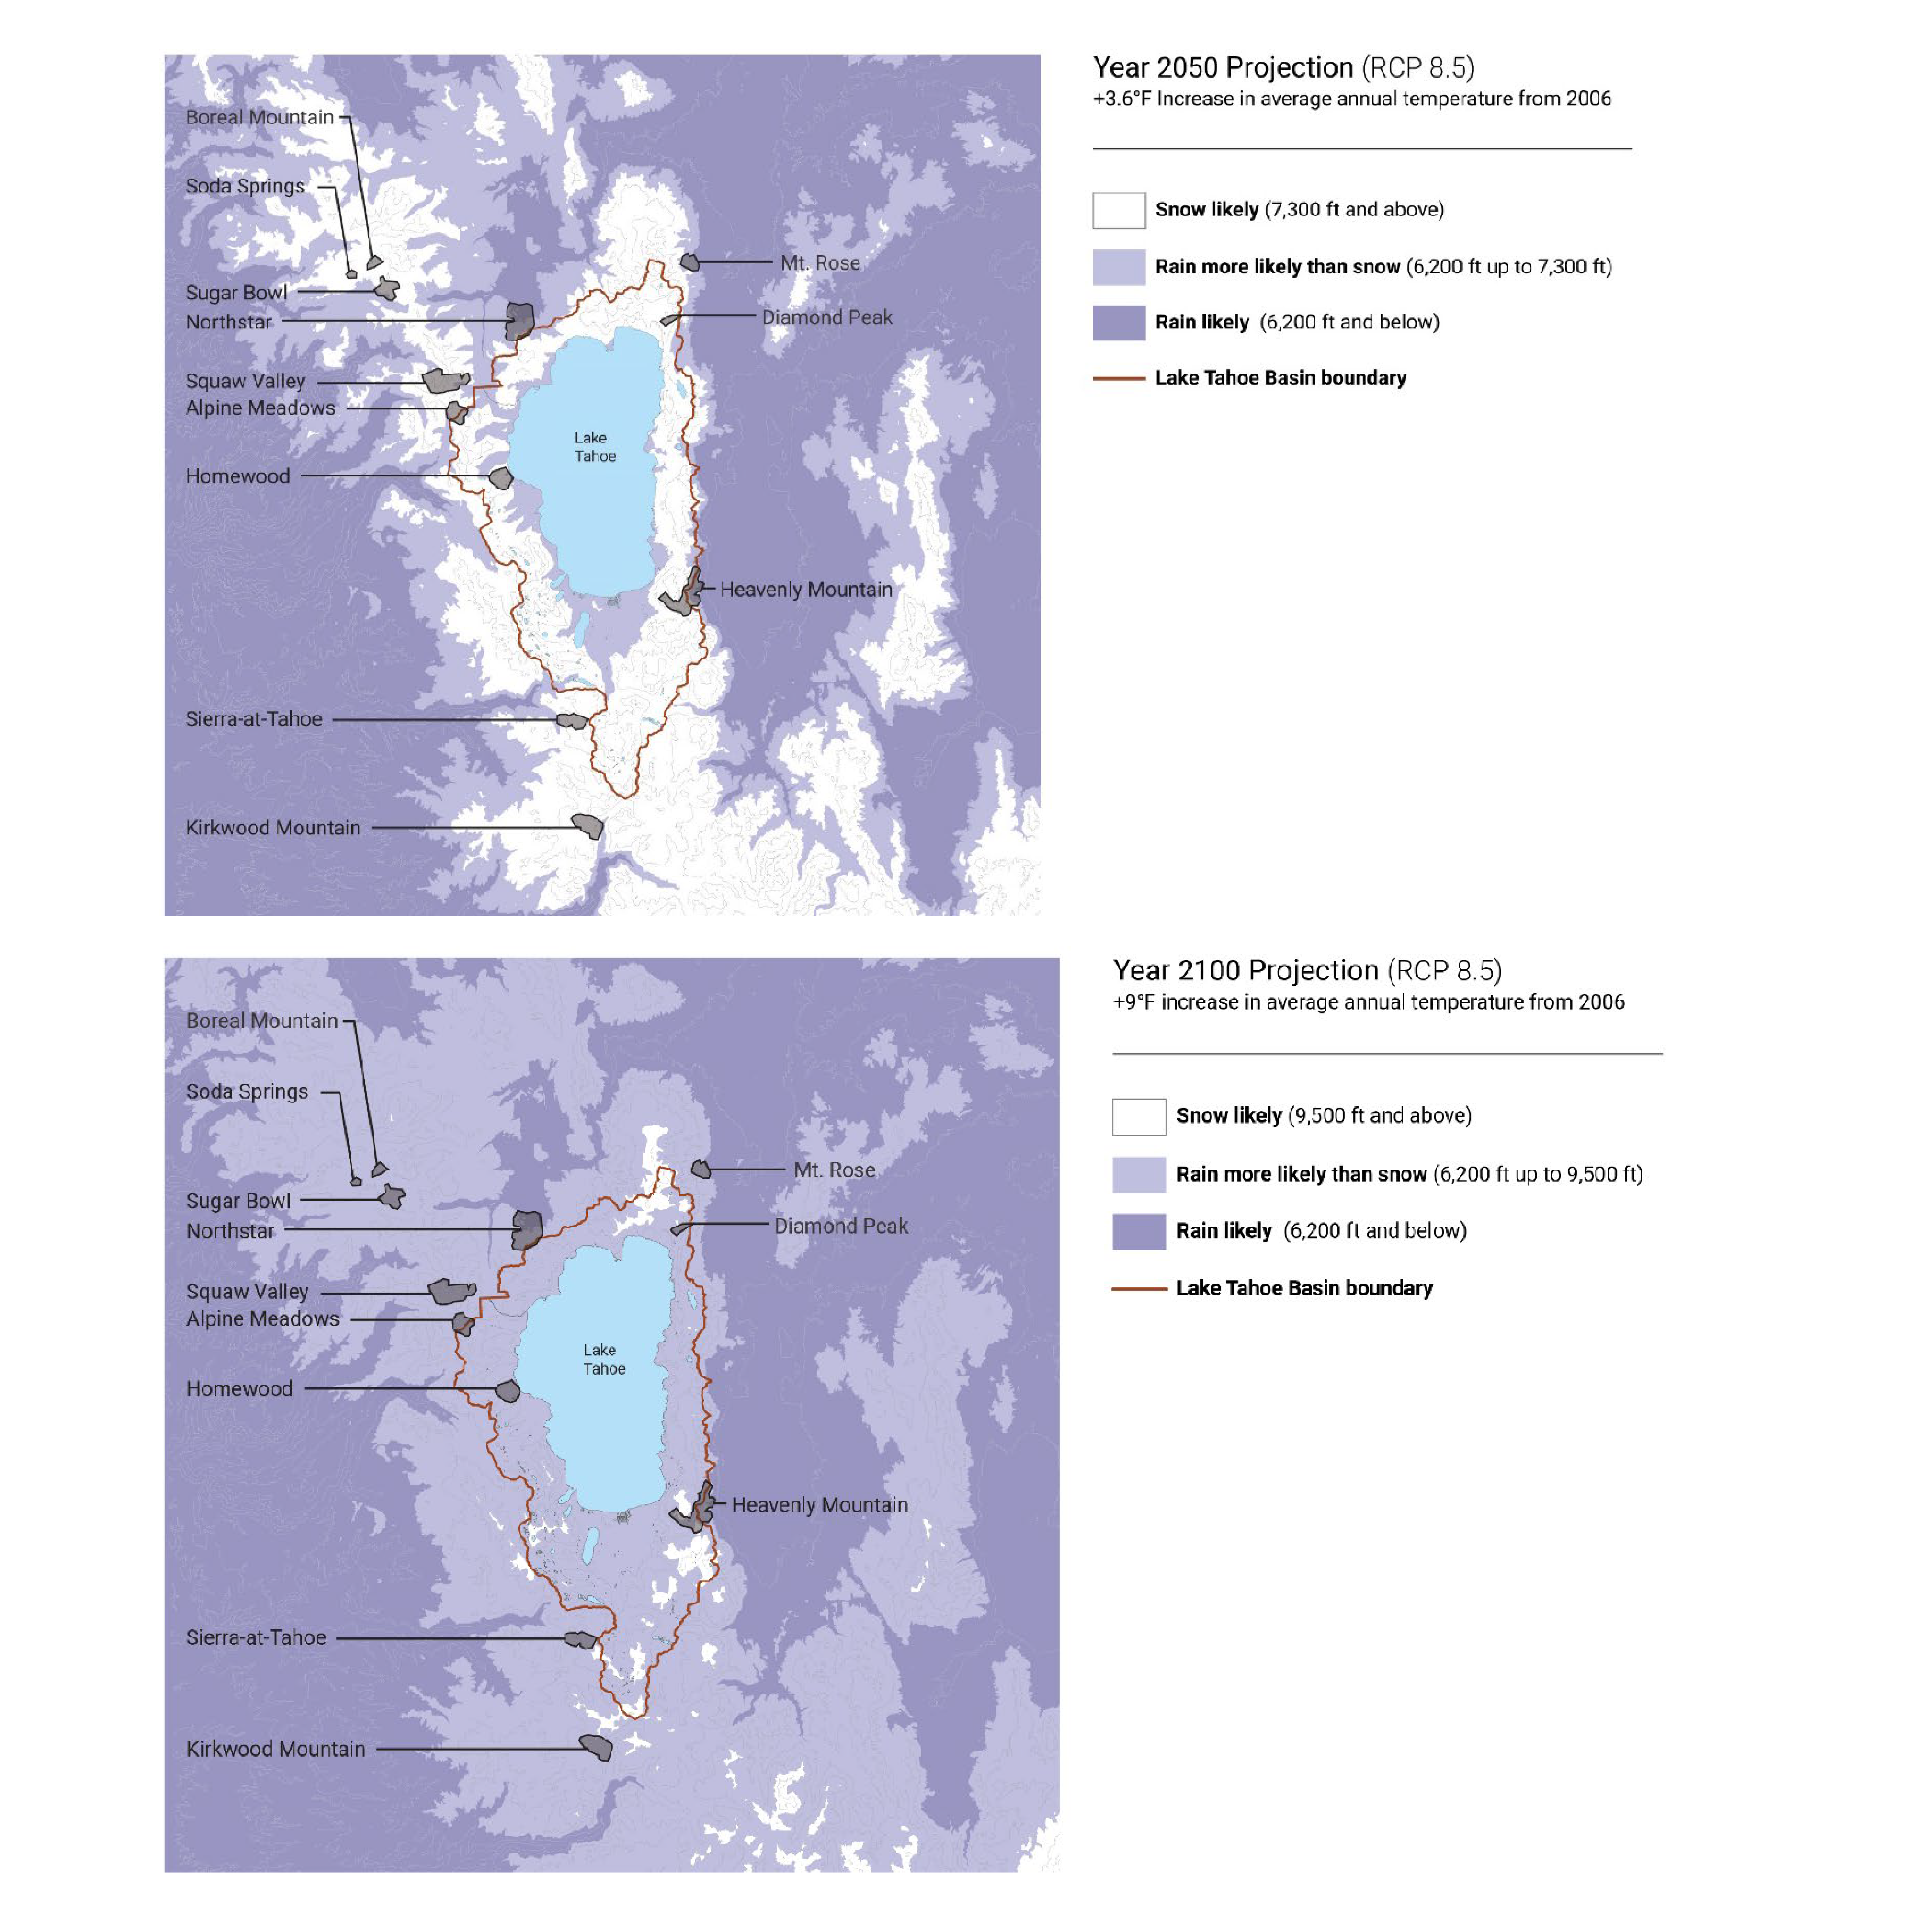 Integrated Climate Scenario for projected snowpack in 2050 and 2100 under RCP 8.5